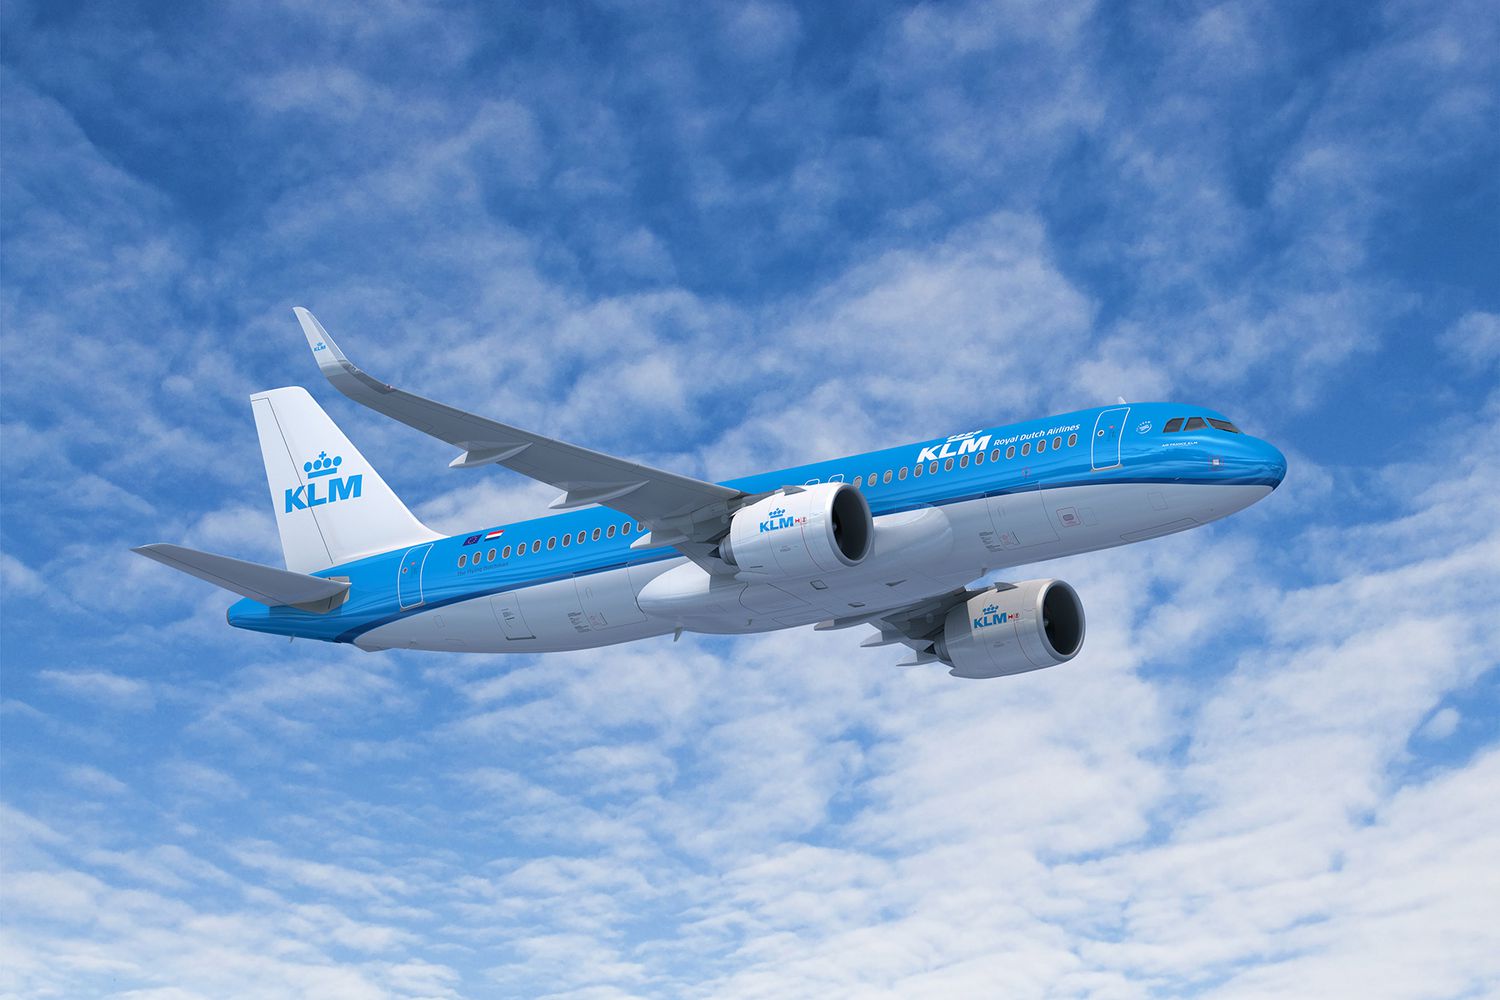 klm-airlines-booking6433abea2cfd3.jpg